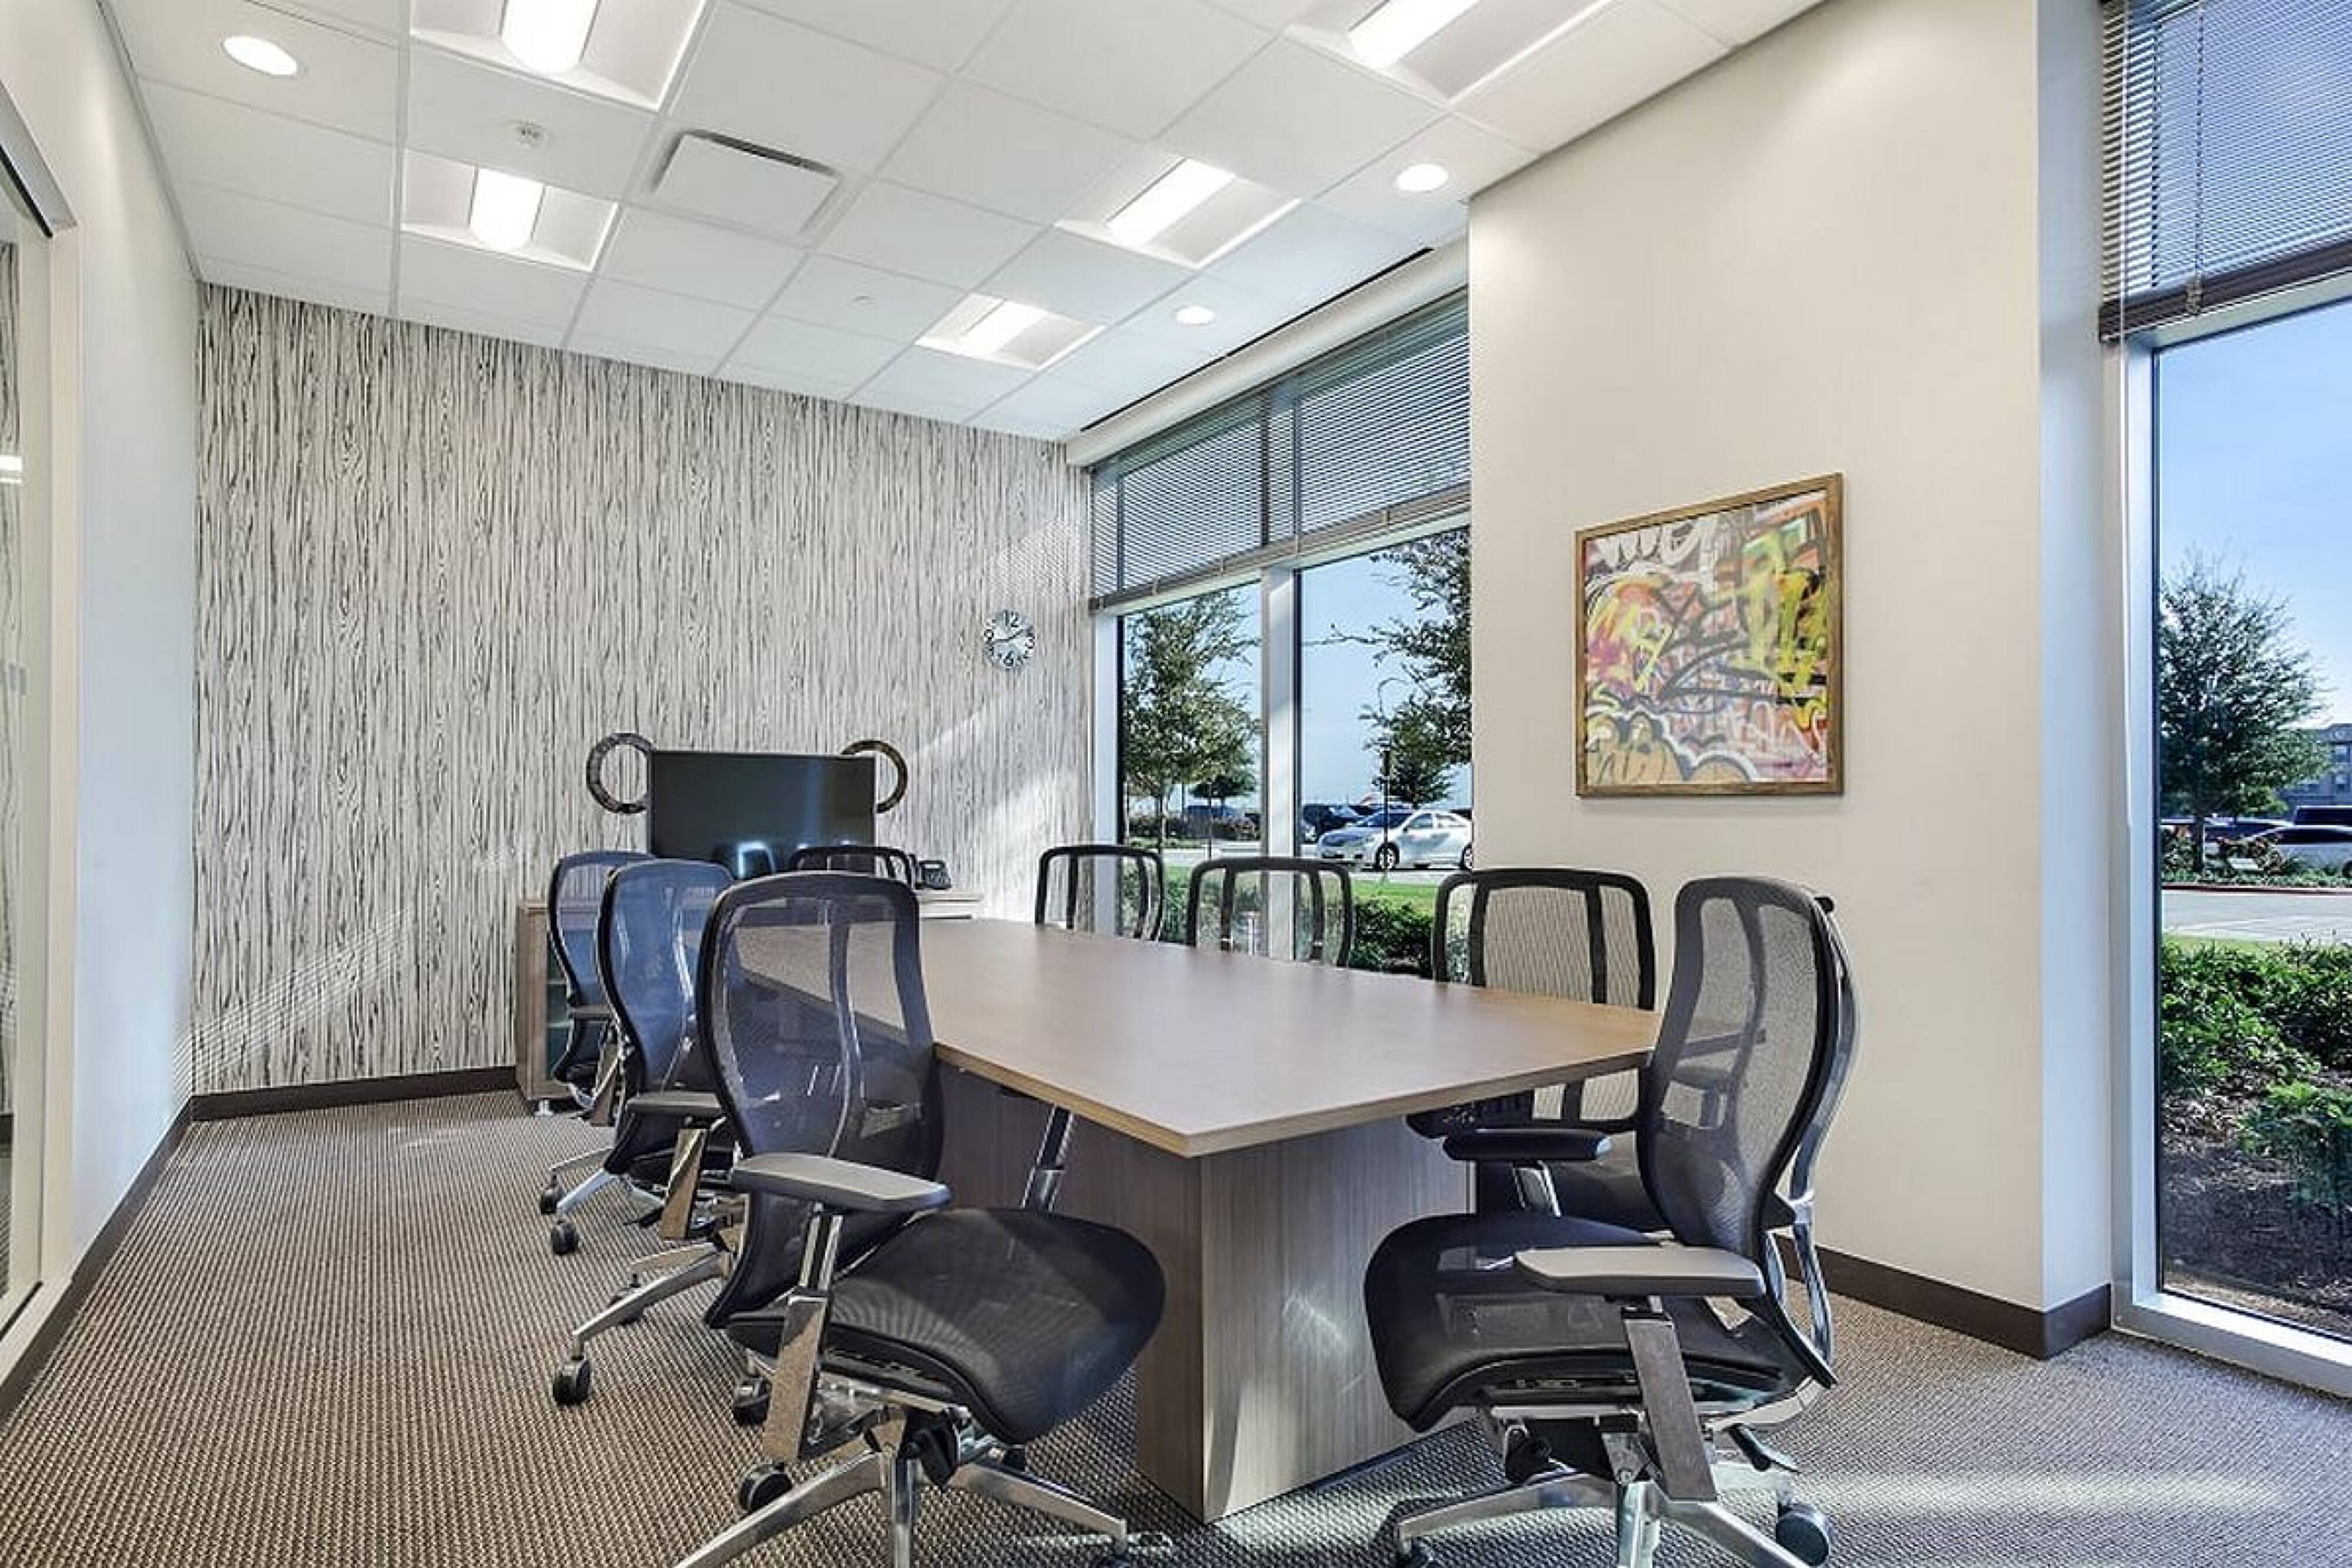 Photo of office table with chairs